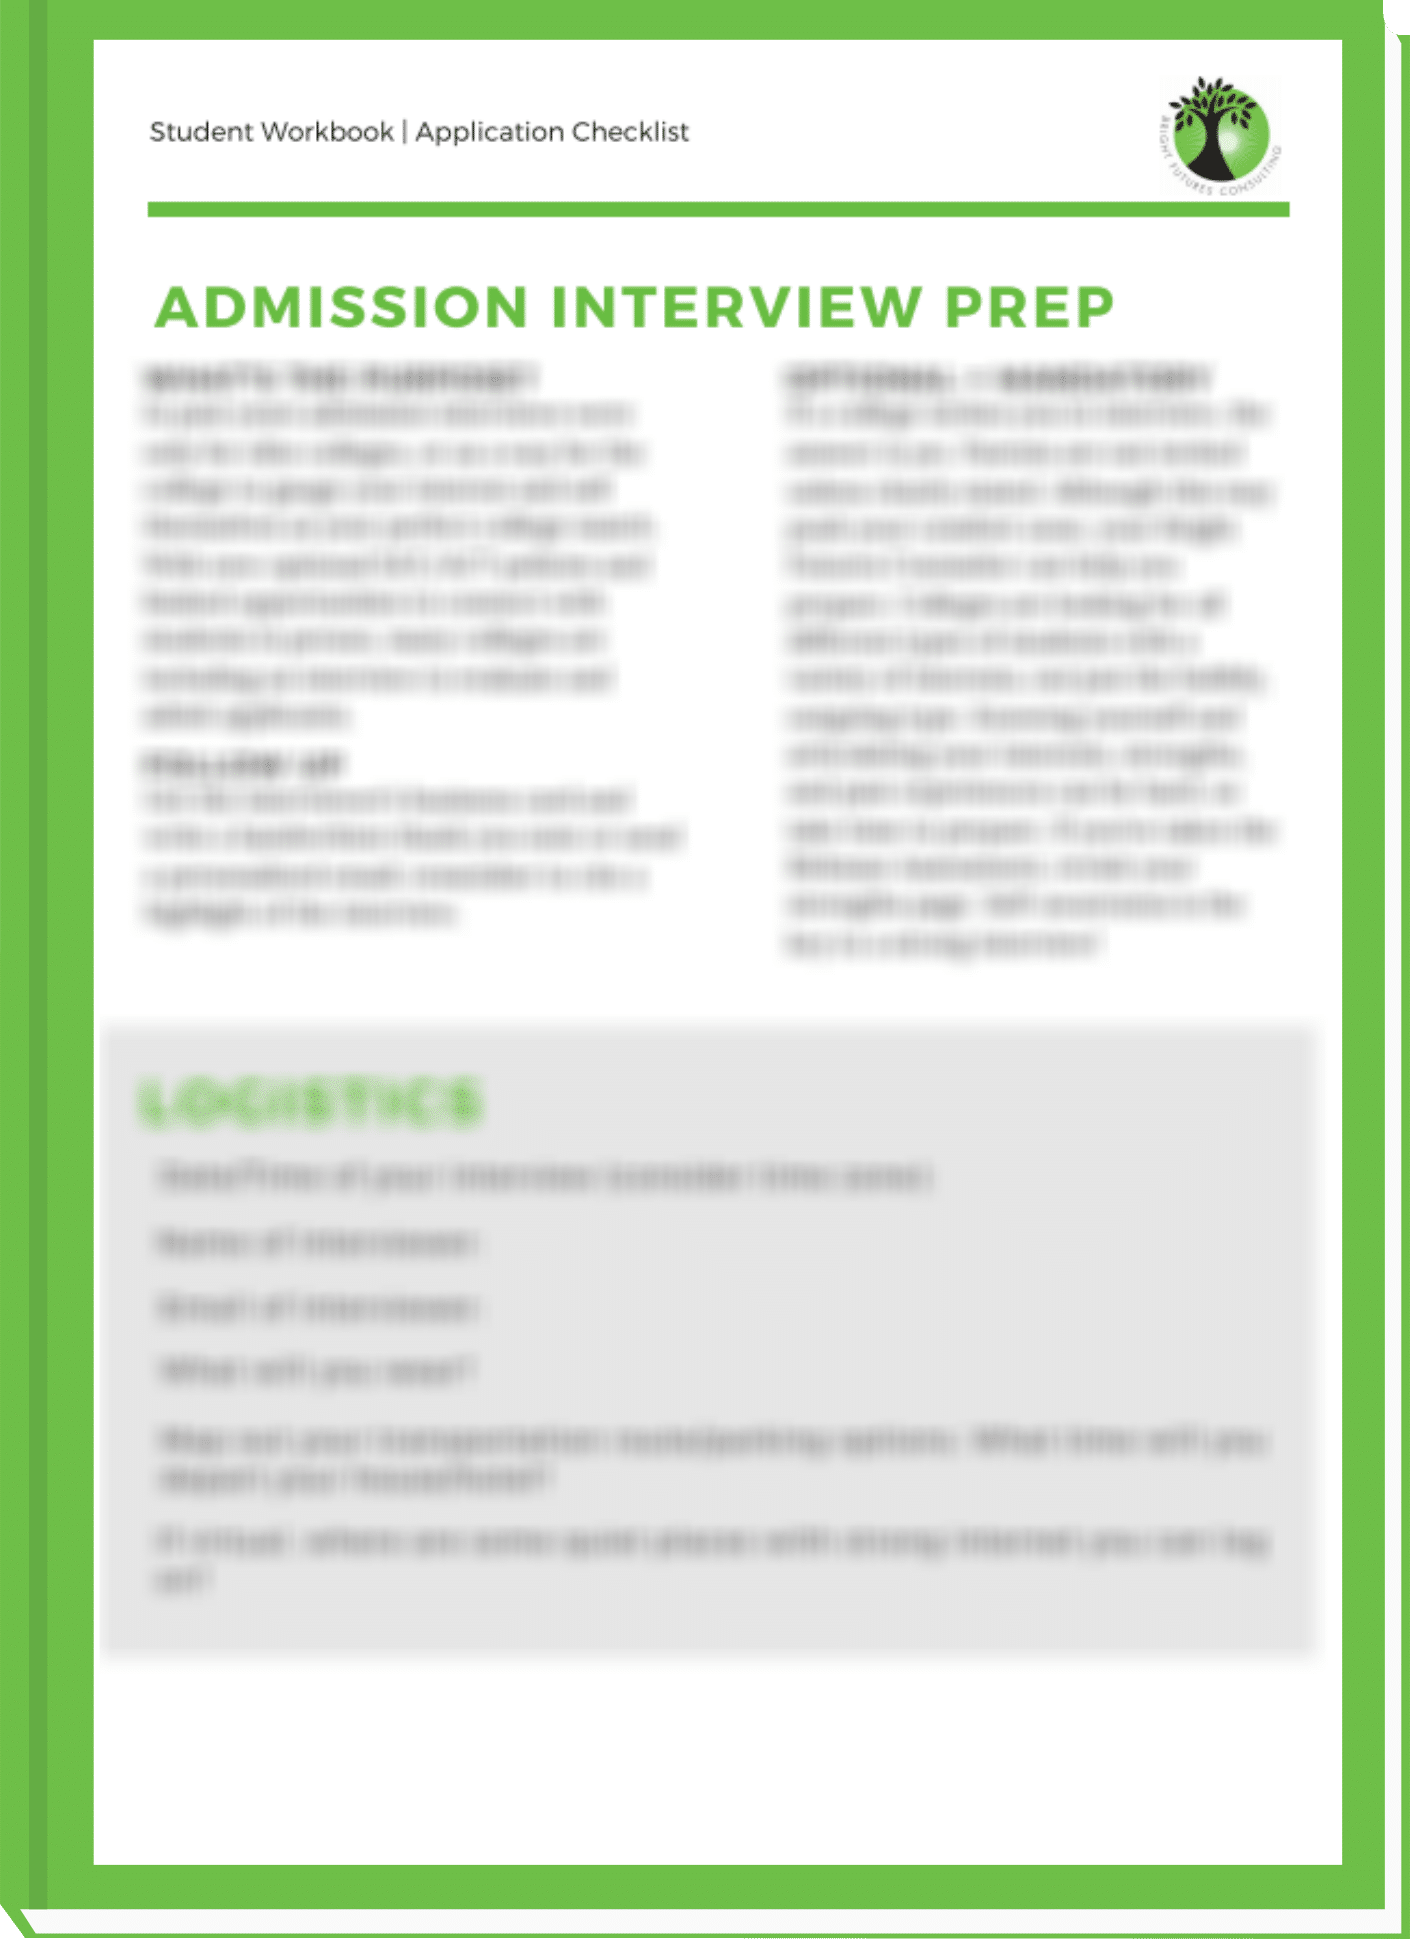 Admission interview Prep Guide